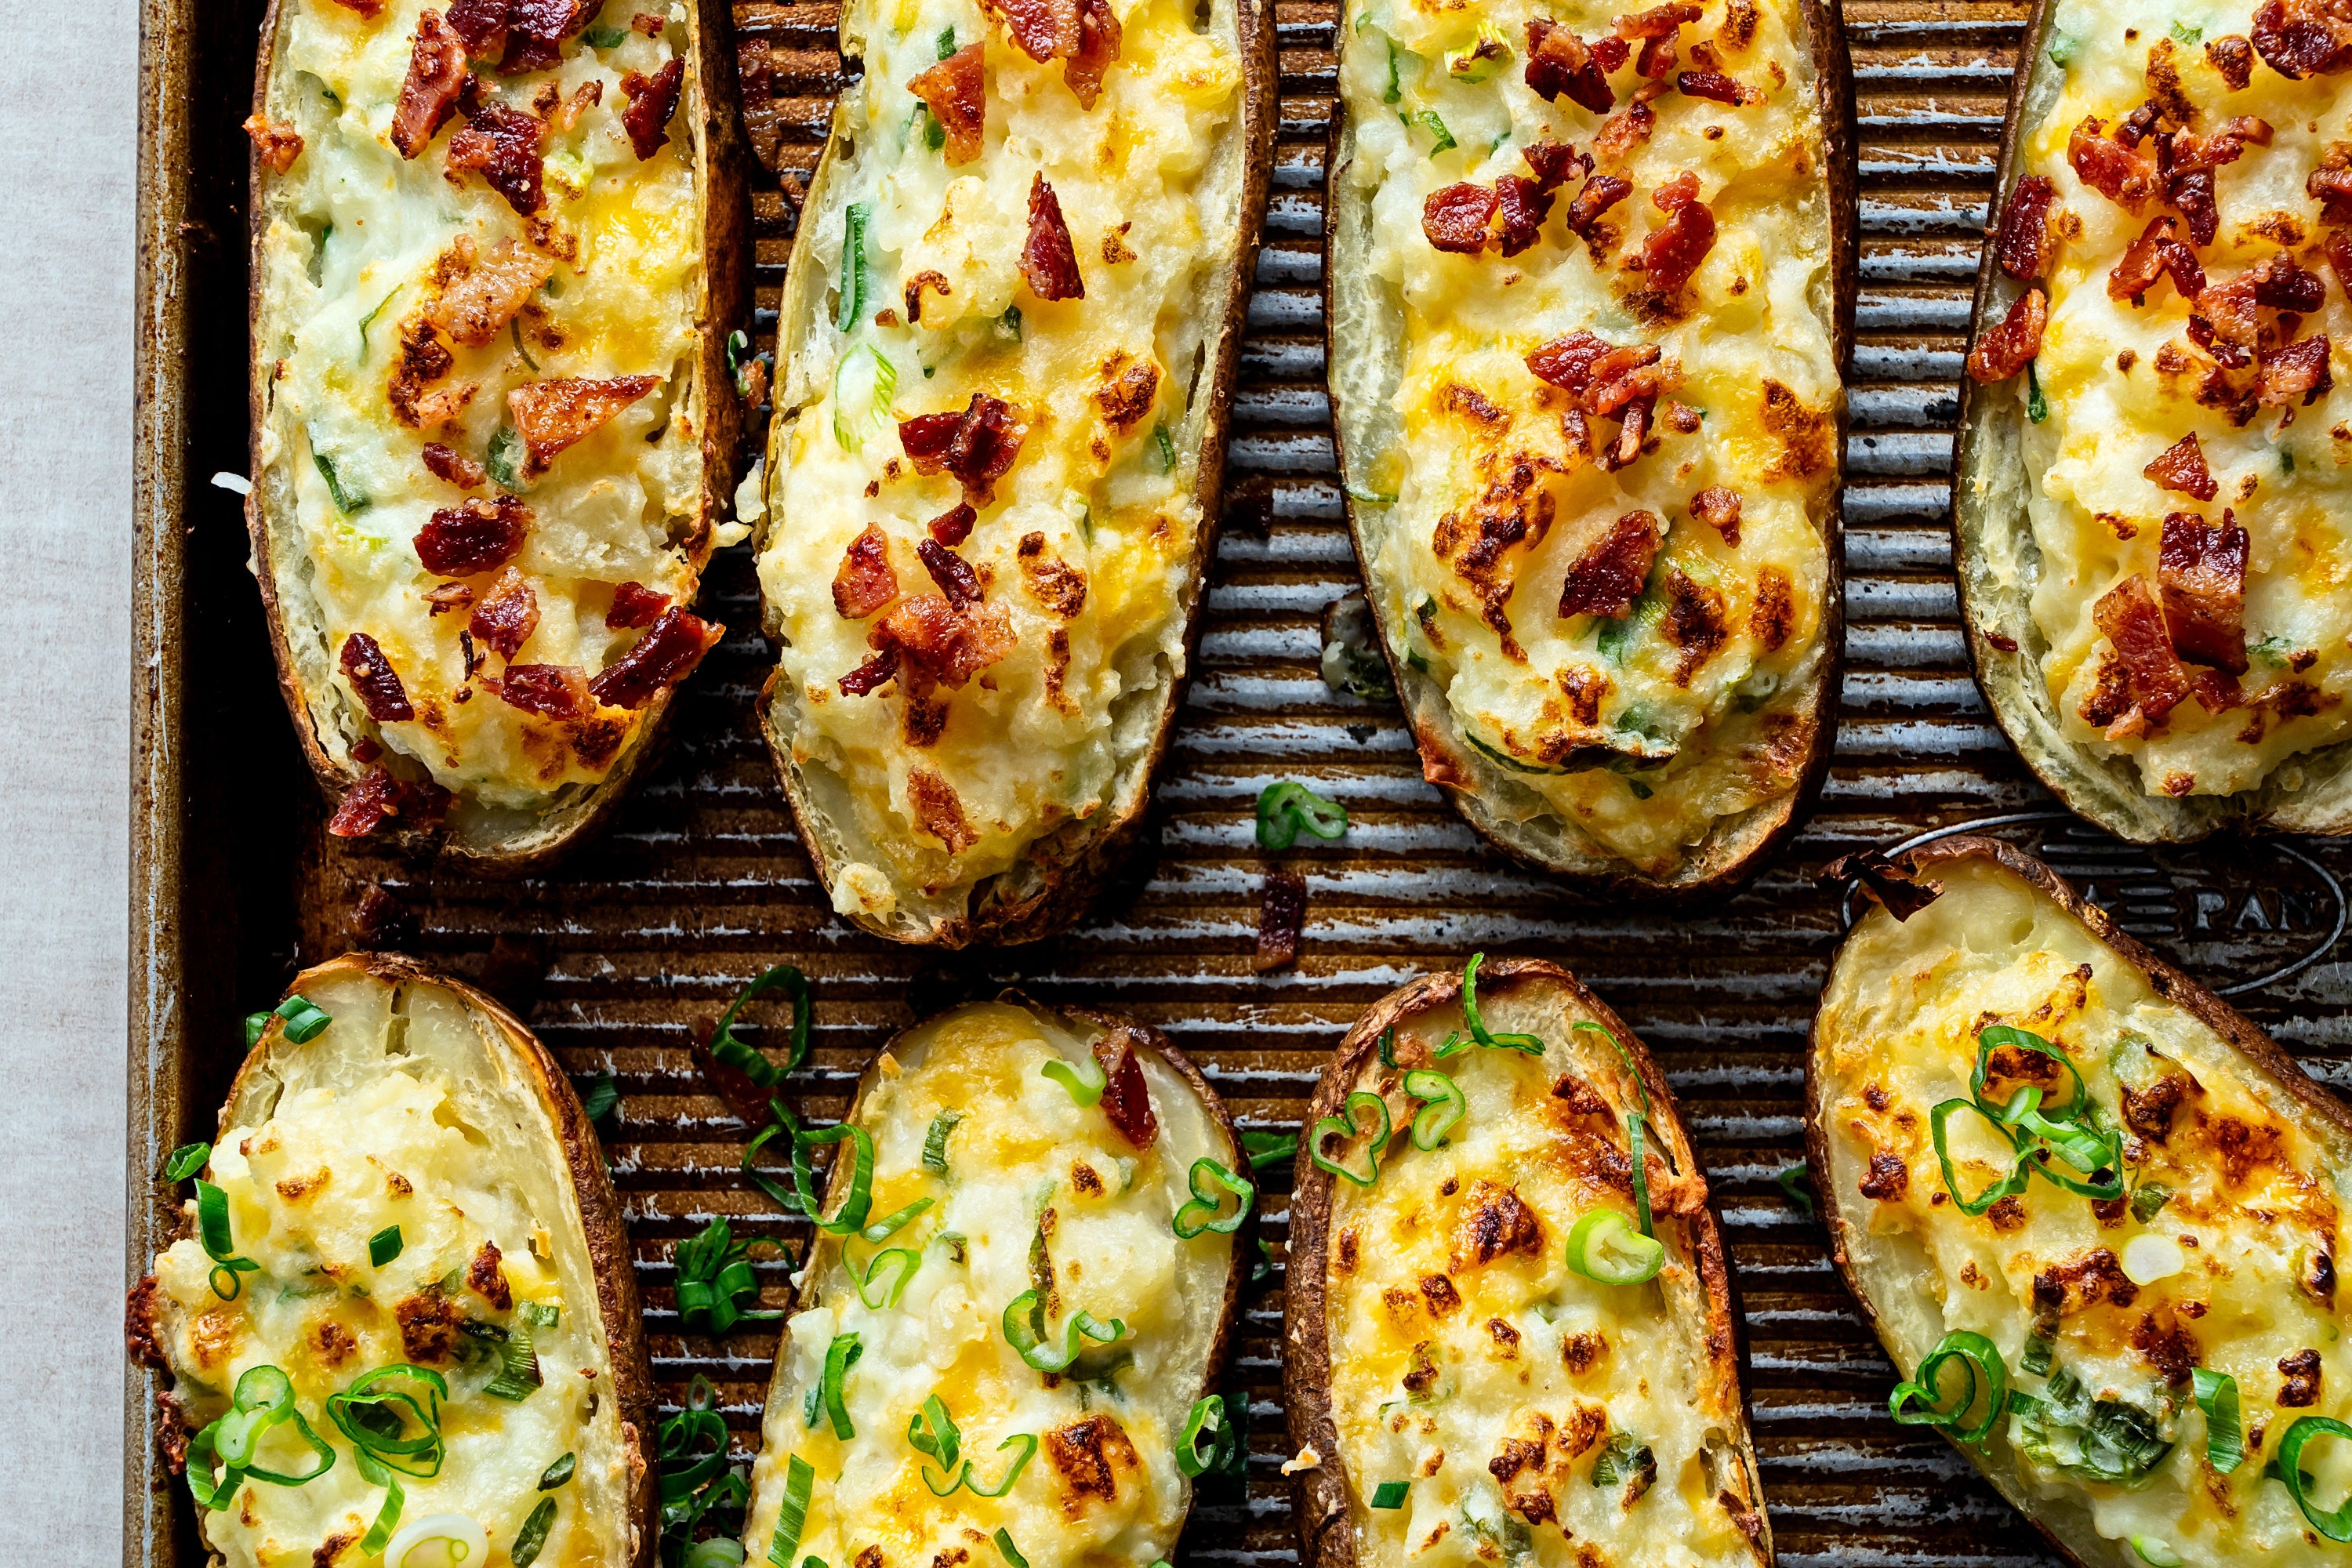 These easy but delicious cheesy twice baked potatoes are the perfect addition for celebrating dads this year